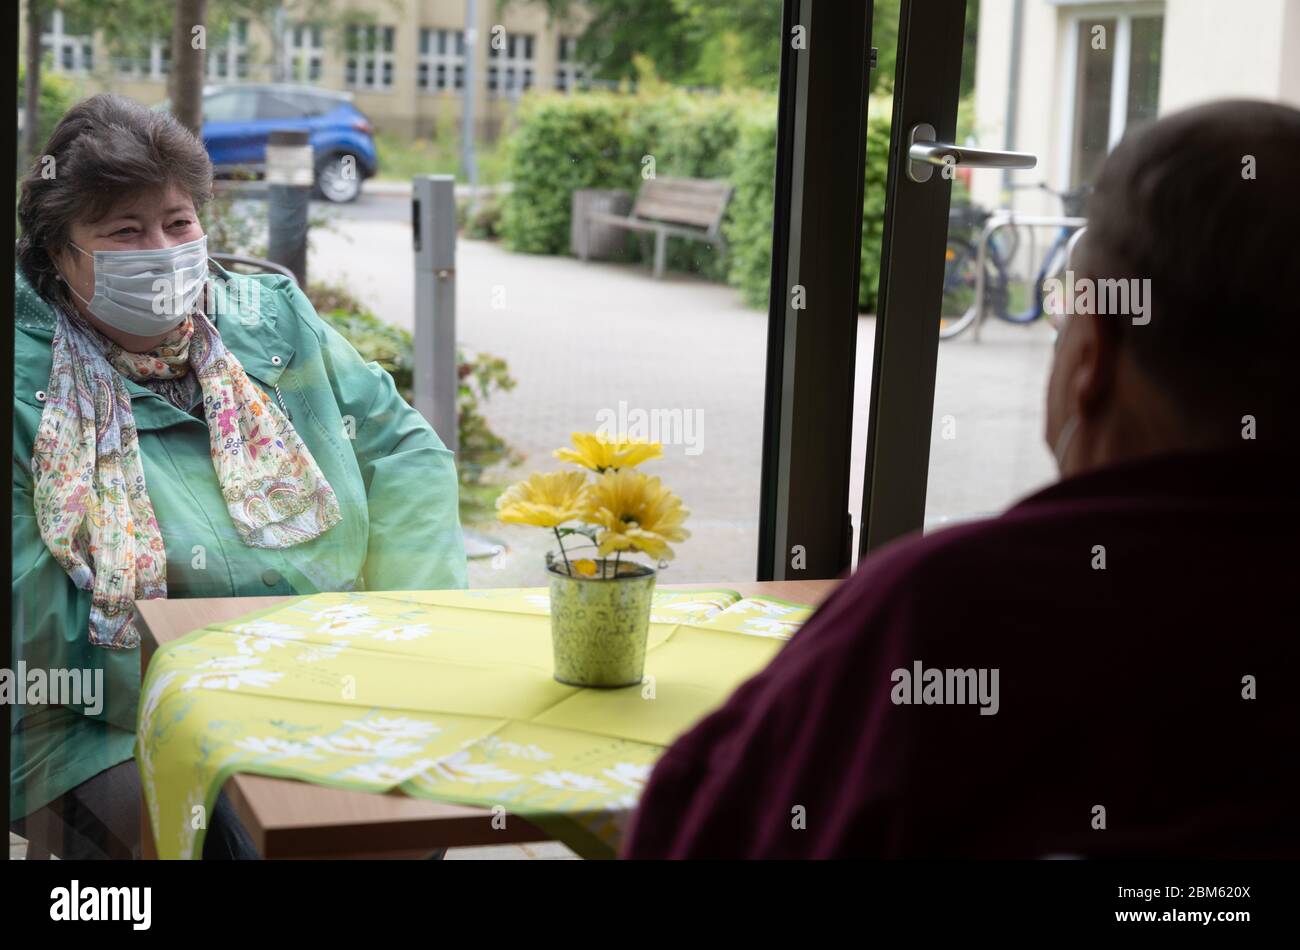 Berlin, Germany. 07th May, 2020. Ilona Spottke (l) and Karl Gegner are talking through a window pane on the ground floor of a nursing home. In the nursing home the residents can meet relatives. In the days of Corona, some nursing homes in Berlin have found visiting solutions that comply with the protection regulations. Credit: Christophe Gateau/dpa/Alamy Live News Stock Photo